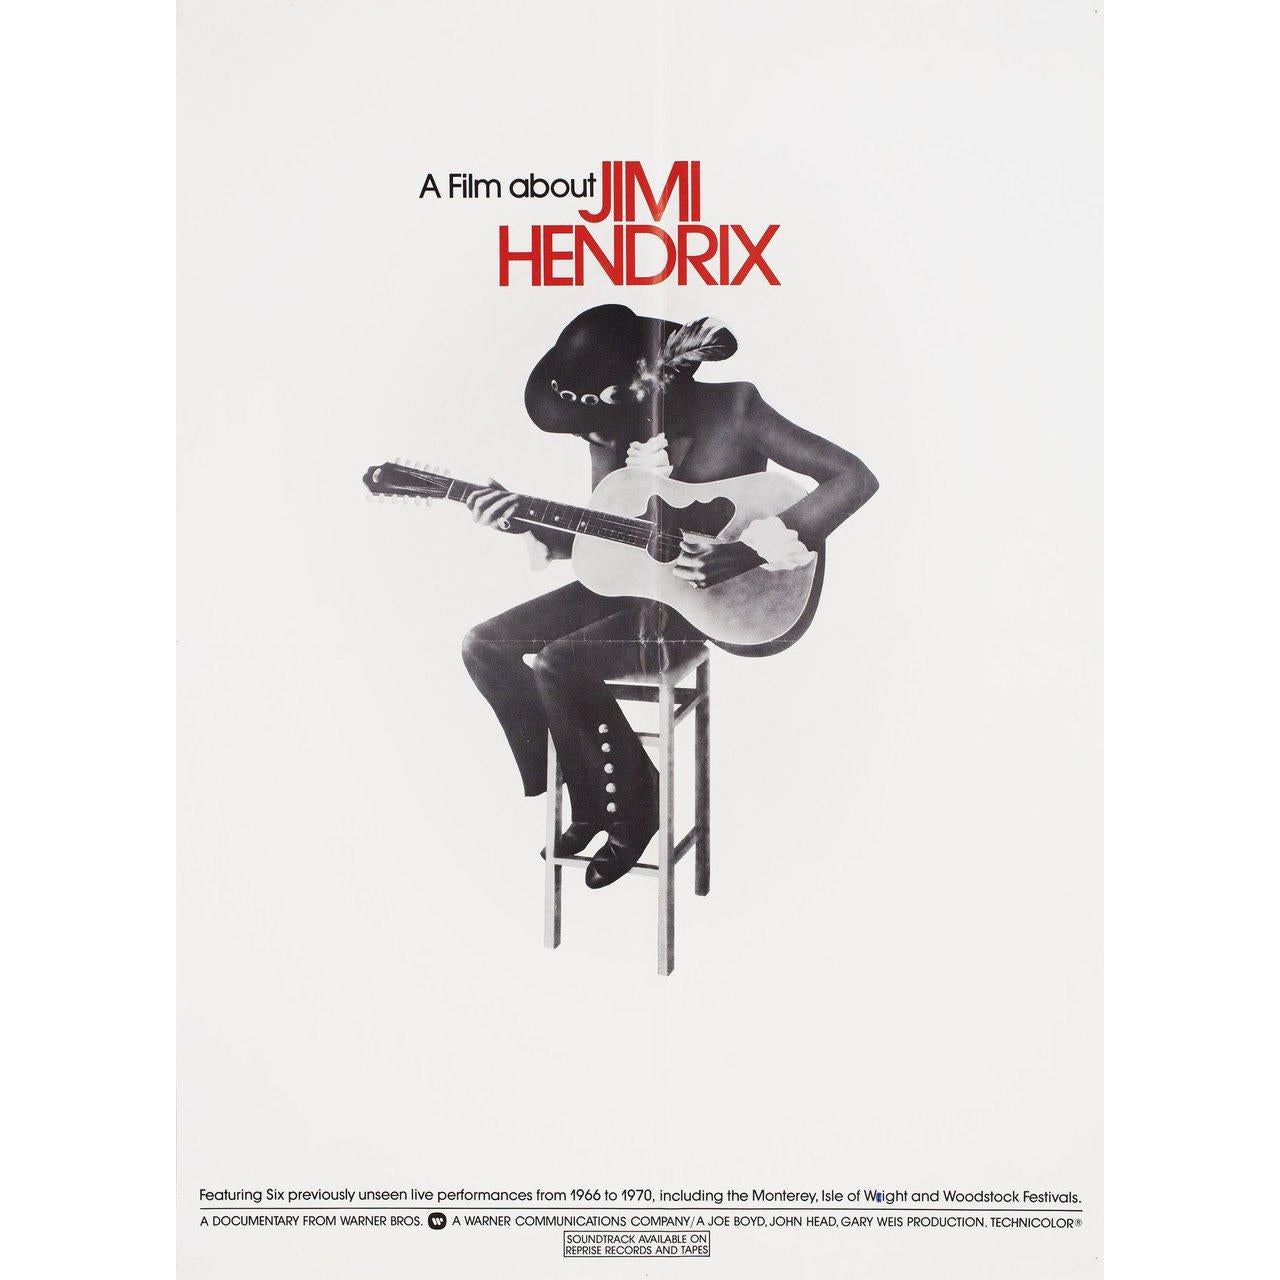 American A Film about Jimi Hendrix 1973 U.S. Film Poster For Sale